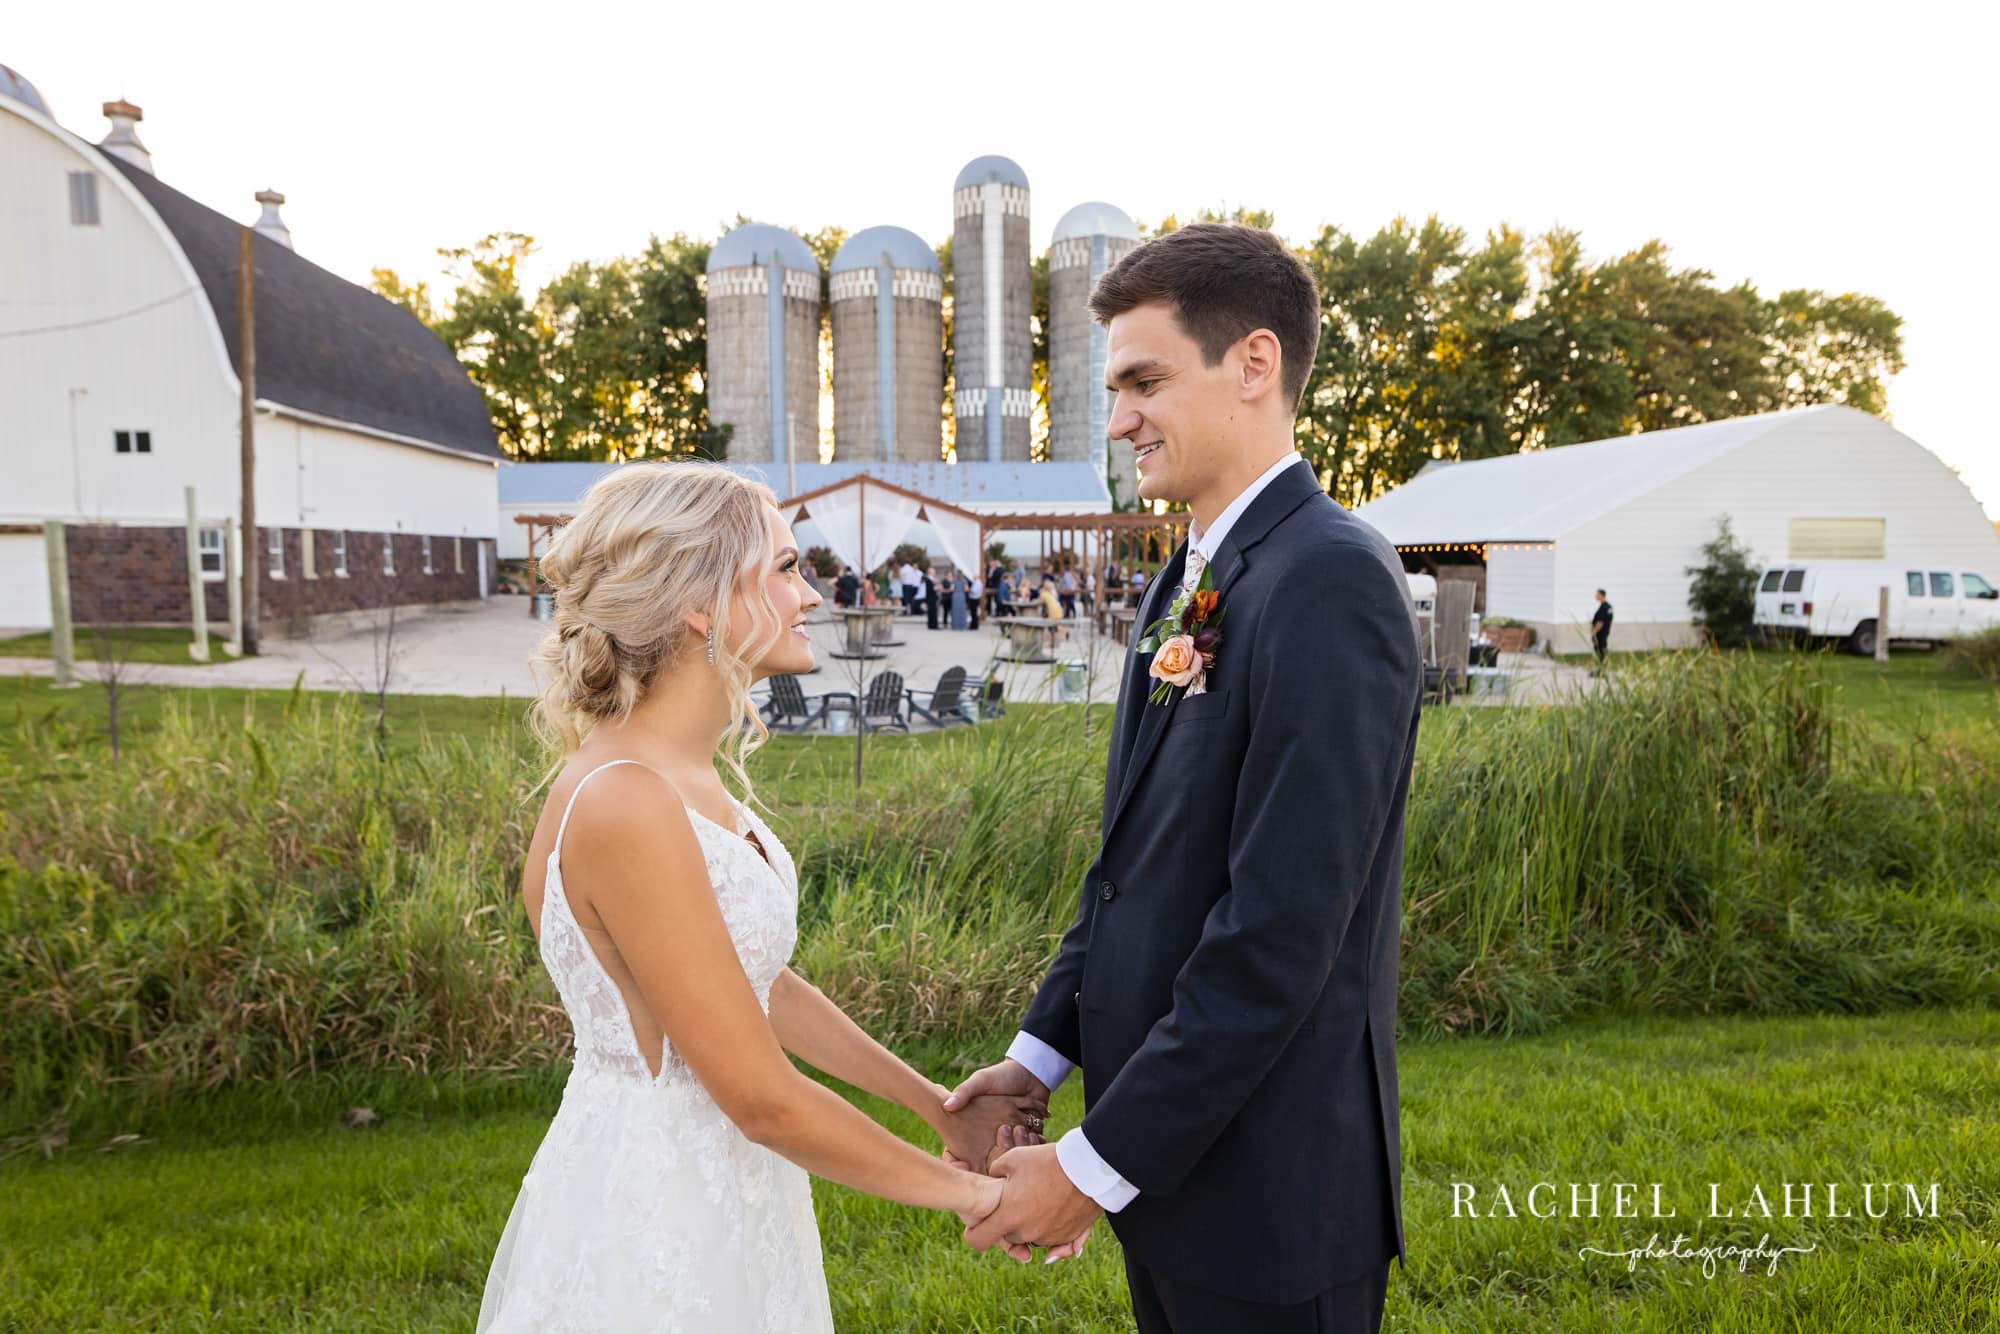 Bride and groom hold hands and look at each other in front of the silos of the Cottage Farmhouse.